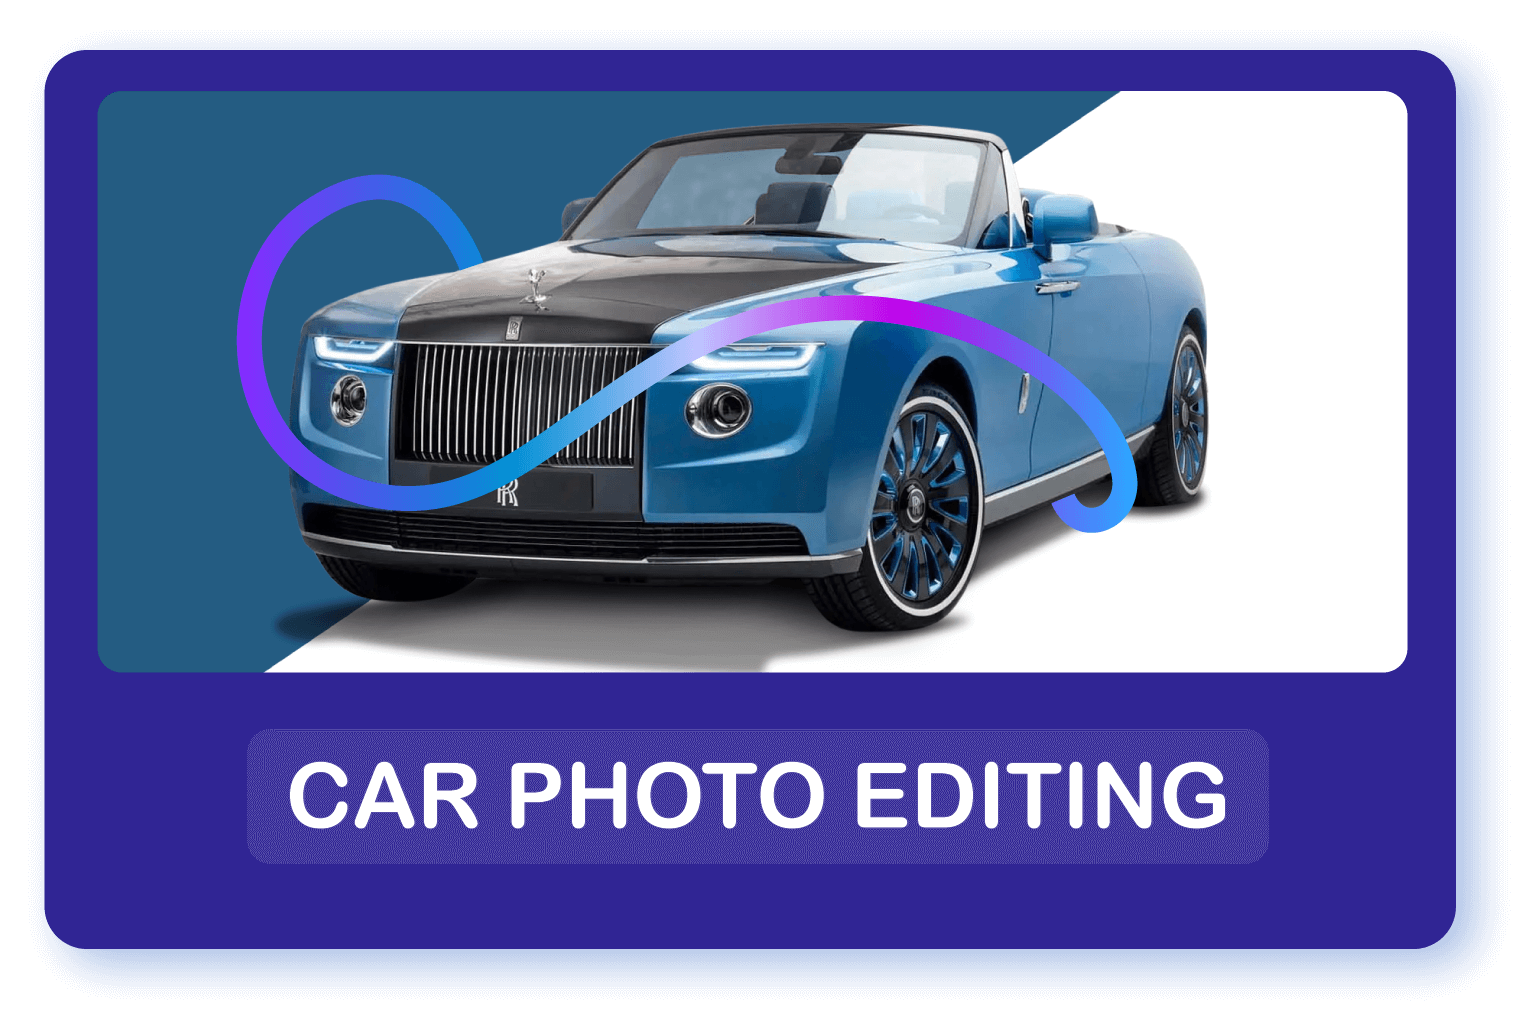 Car photo editing services encompass a range of techniques and processes used to enhance and manipulate car images to improve their overall quality, visual appeal, and effectiveness for various purposes. These services are commonly utilized in the automotive industry by car dealerships, advertising agencies, car photographers, and online marketplaces.